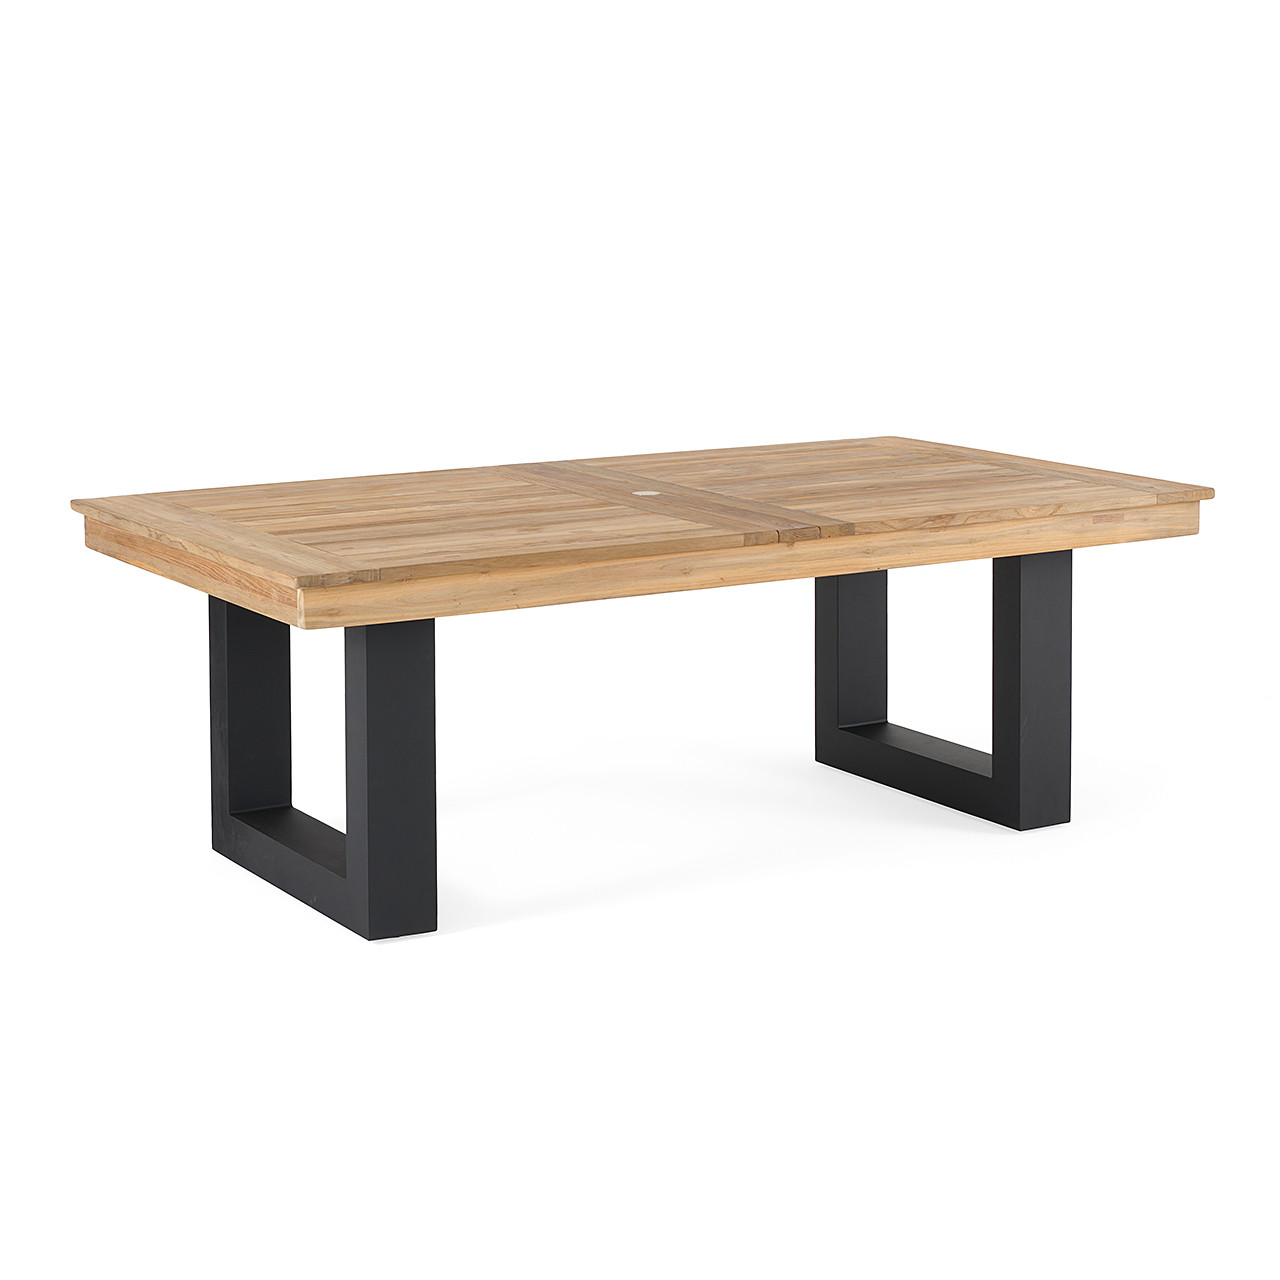 Balencia Teak 87-118 x 47 in. Double Extension Dining Table